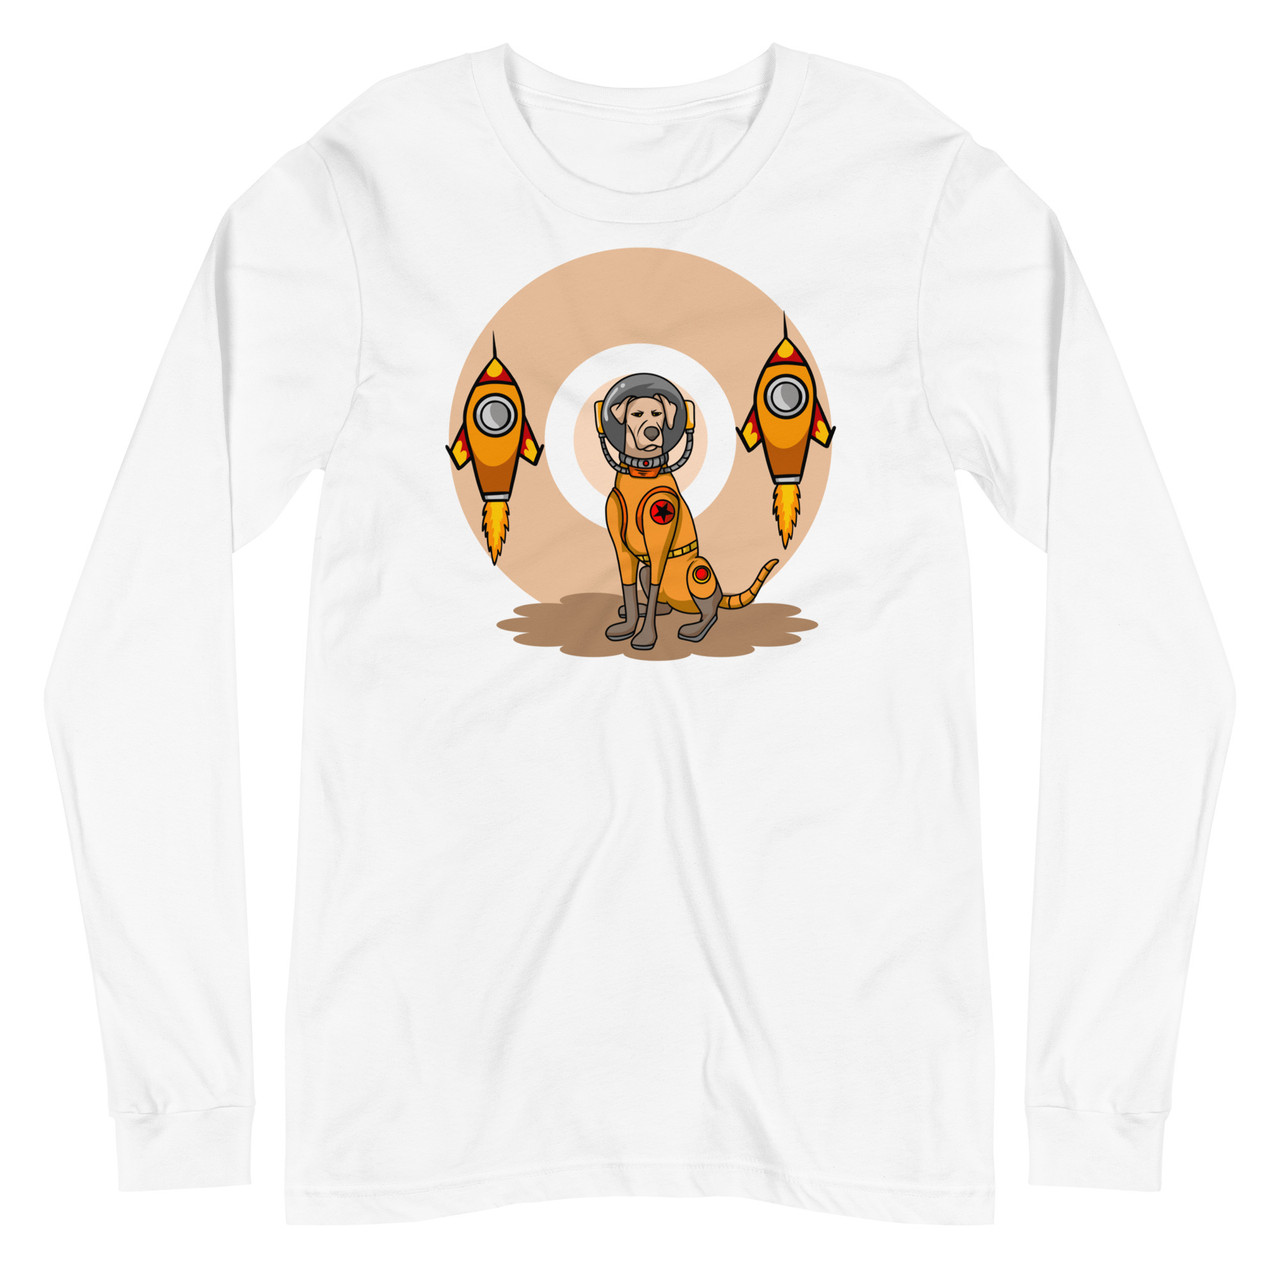 Dog on a Mission Unisex Long Sleeve Tee - Bella + Canvas 3501